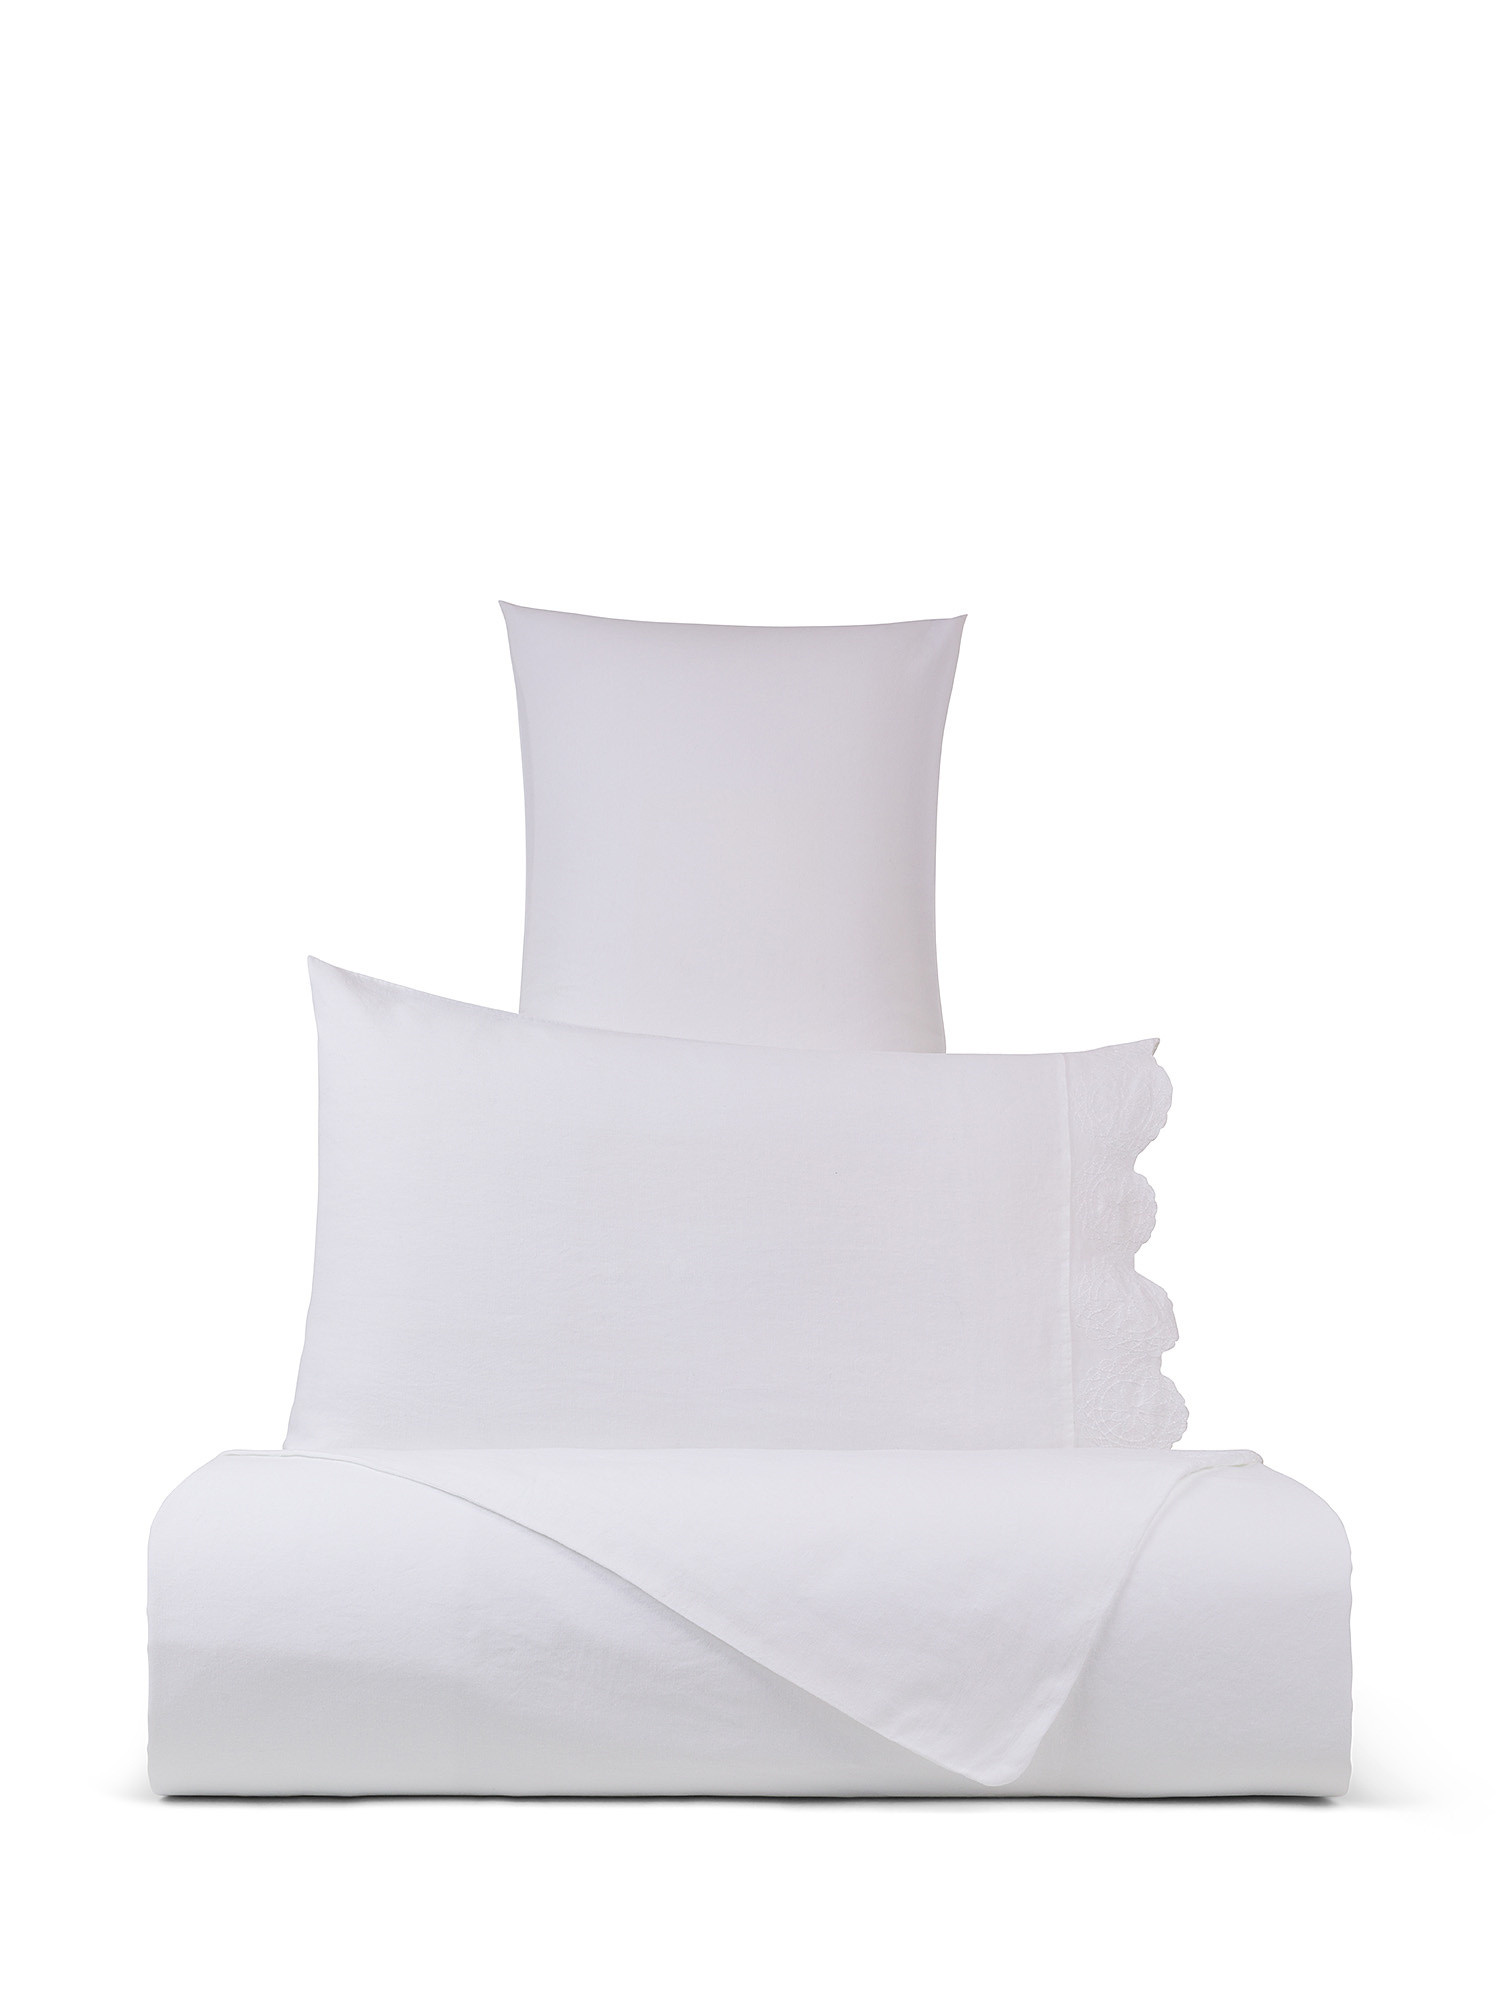 Portofino embroidered linen and cotton duvet cover, White, large image number 0